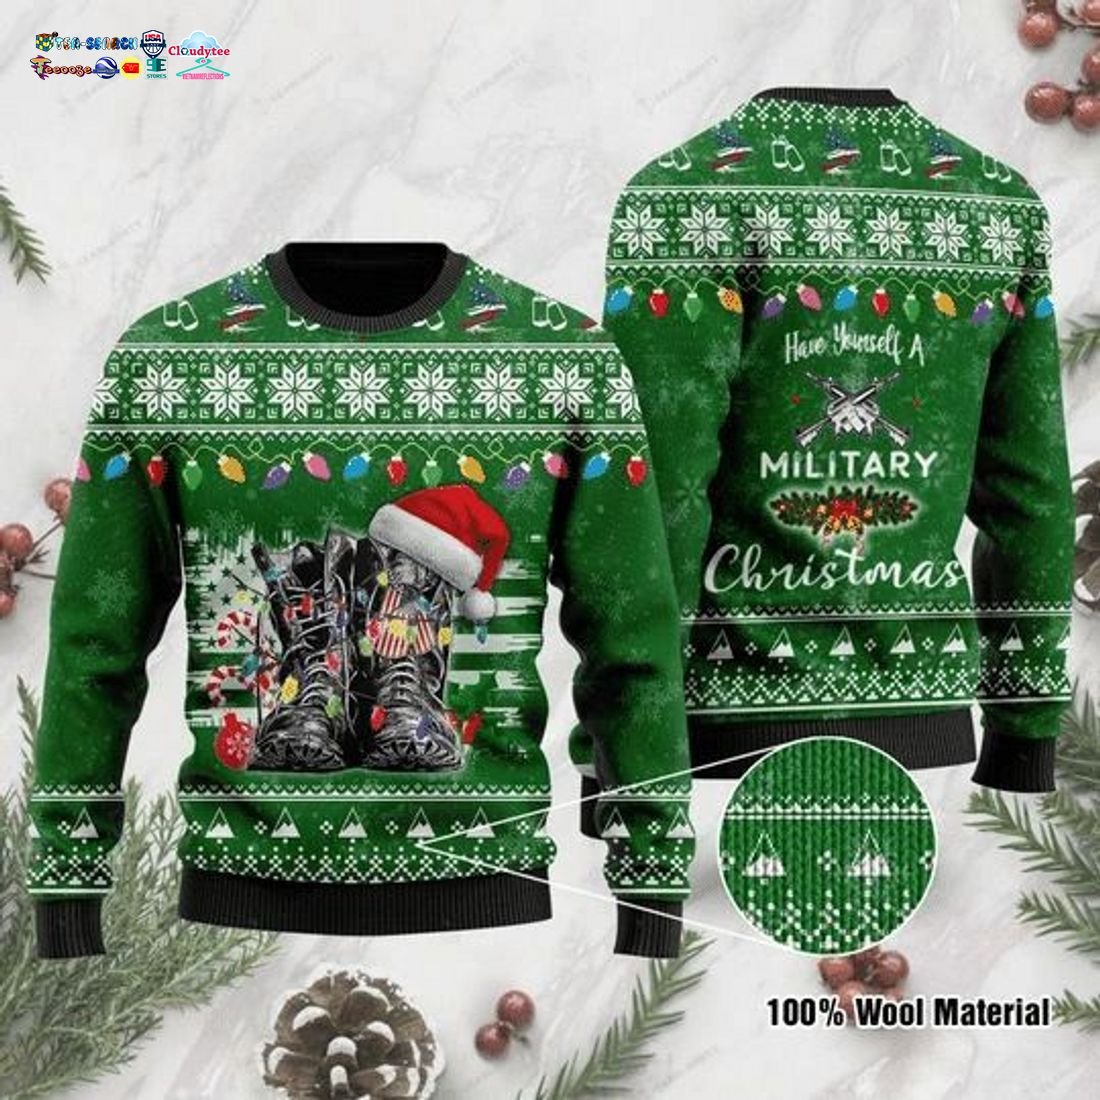 Soldier Shoes Have Yourself A Military Ugly Christmas Sweater